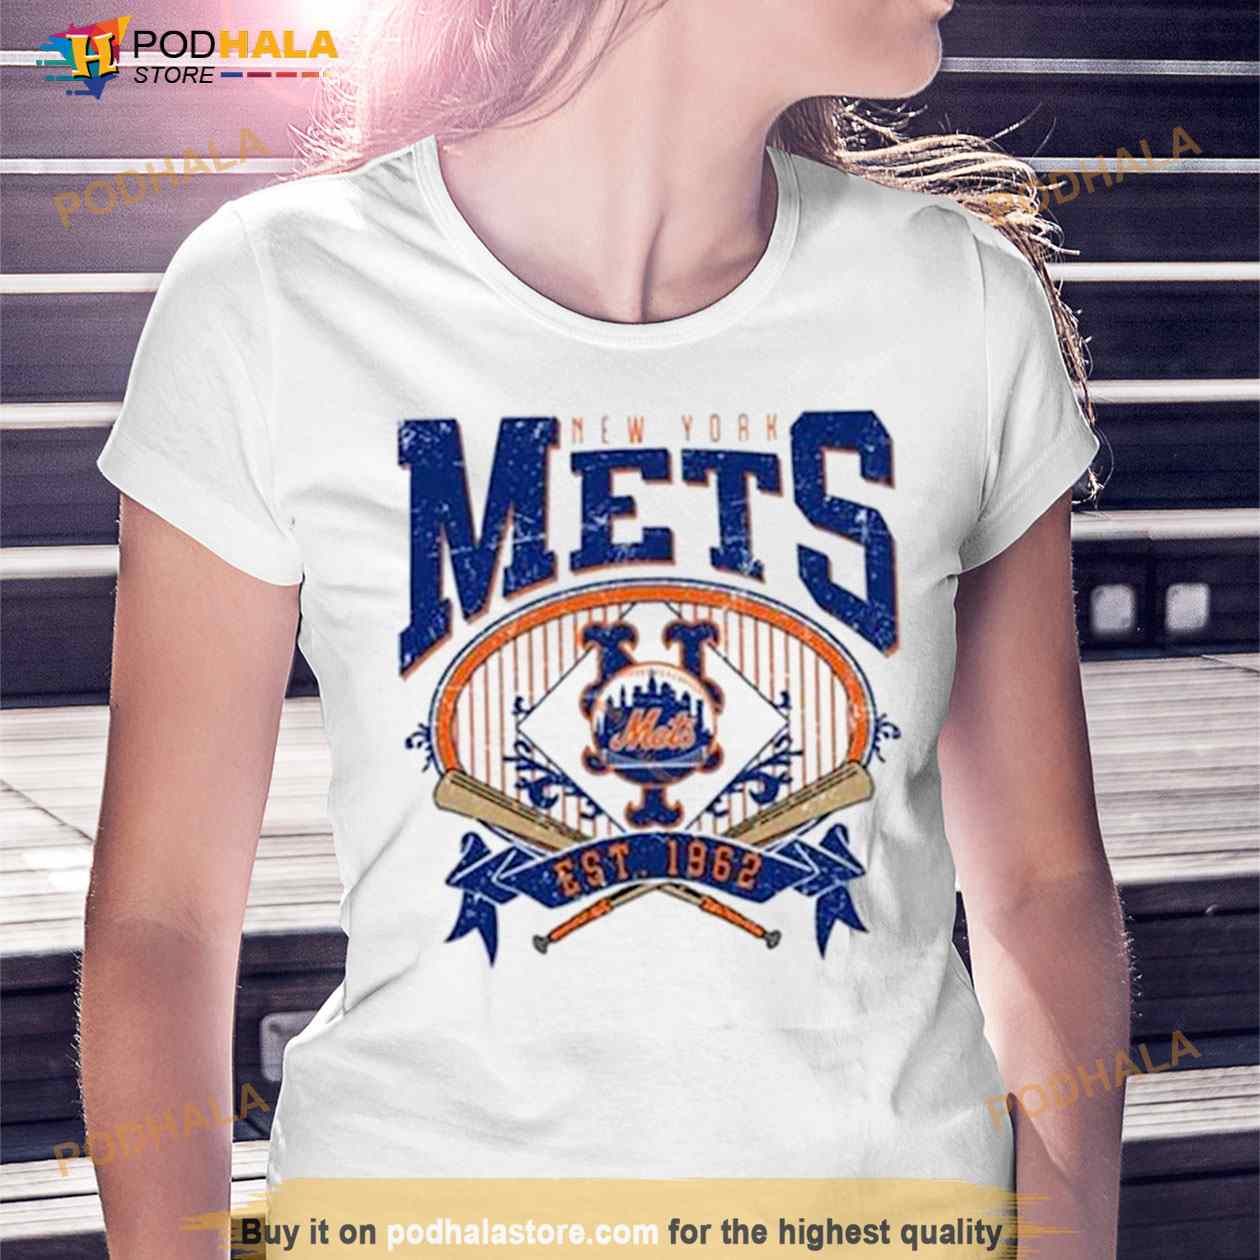 New York Mets EST 1962 Vintage Baseball T Shirt - Bring Your Ideas,  Thoughts And Imaginations Into Reality Today